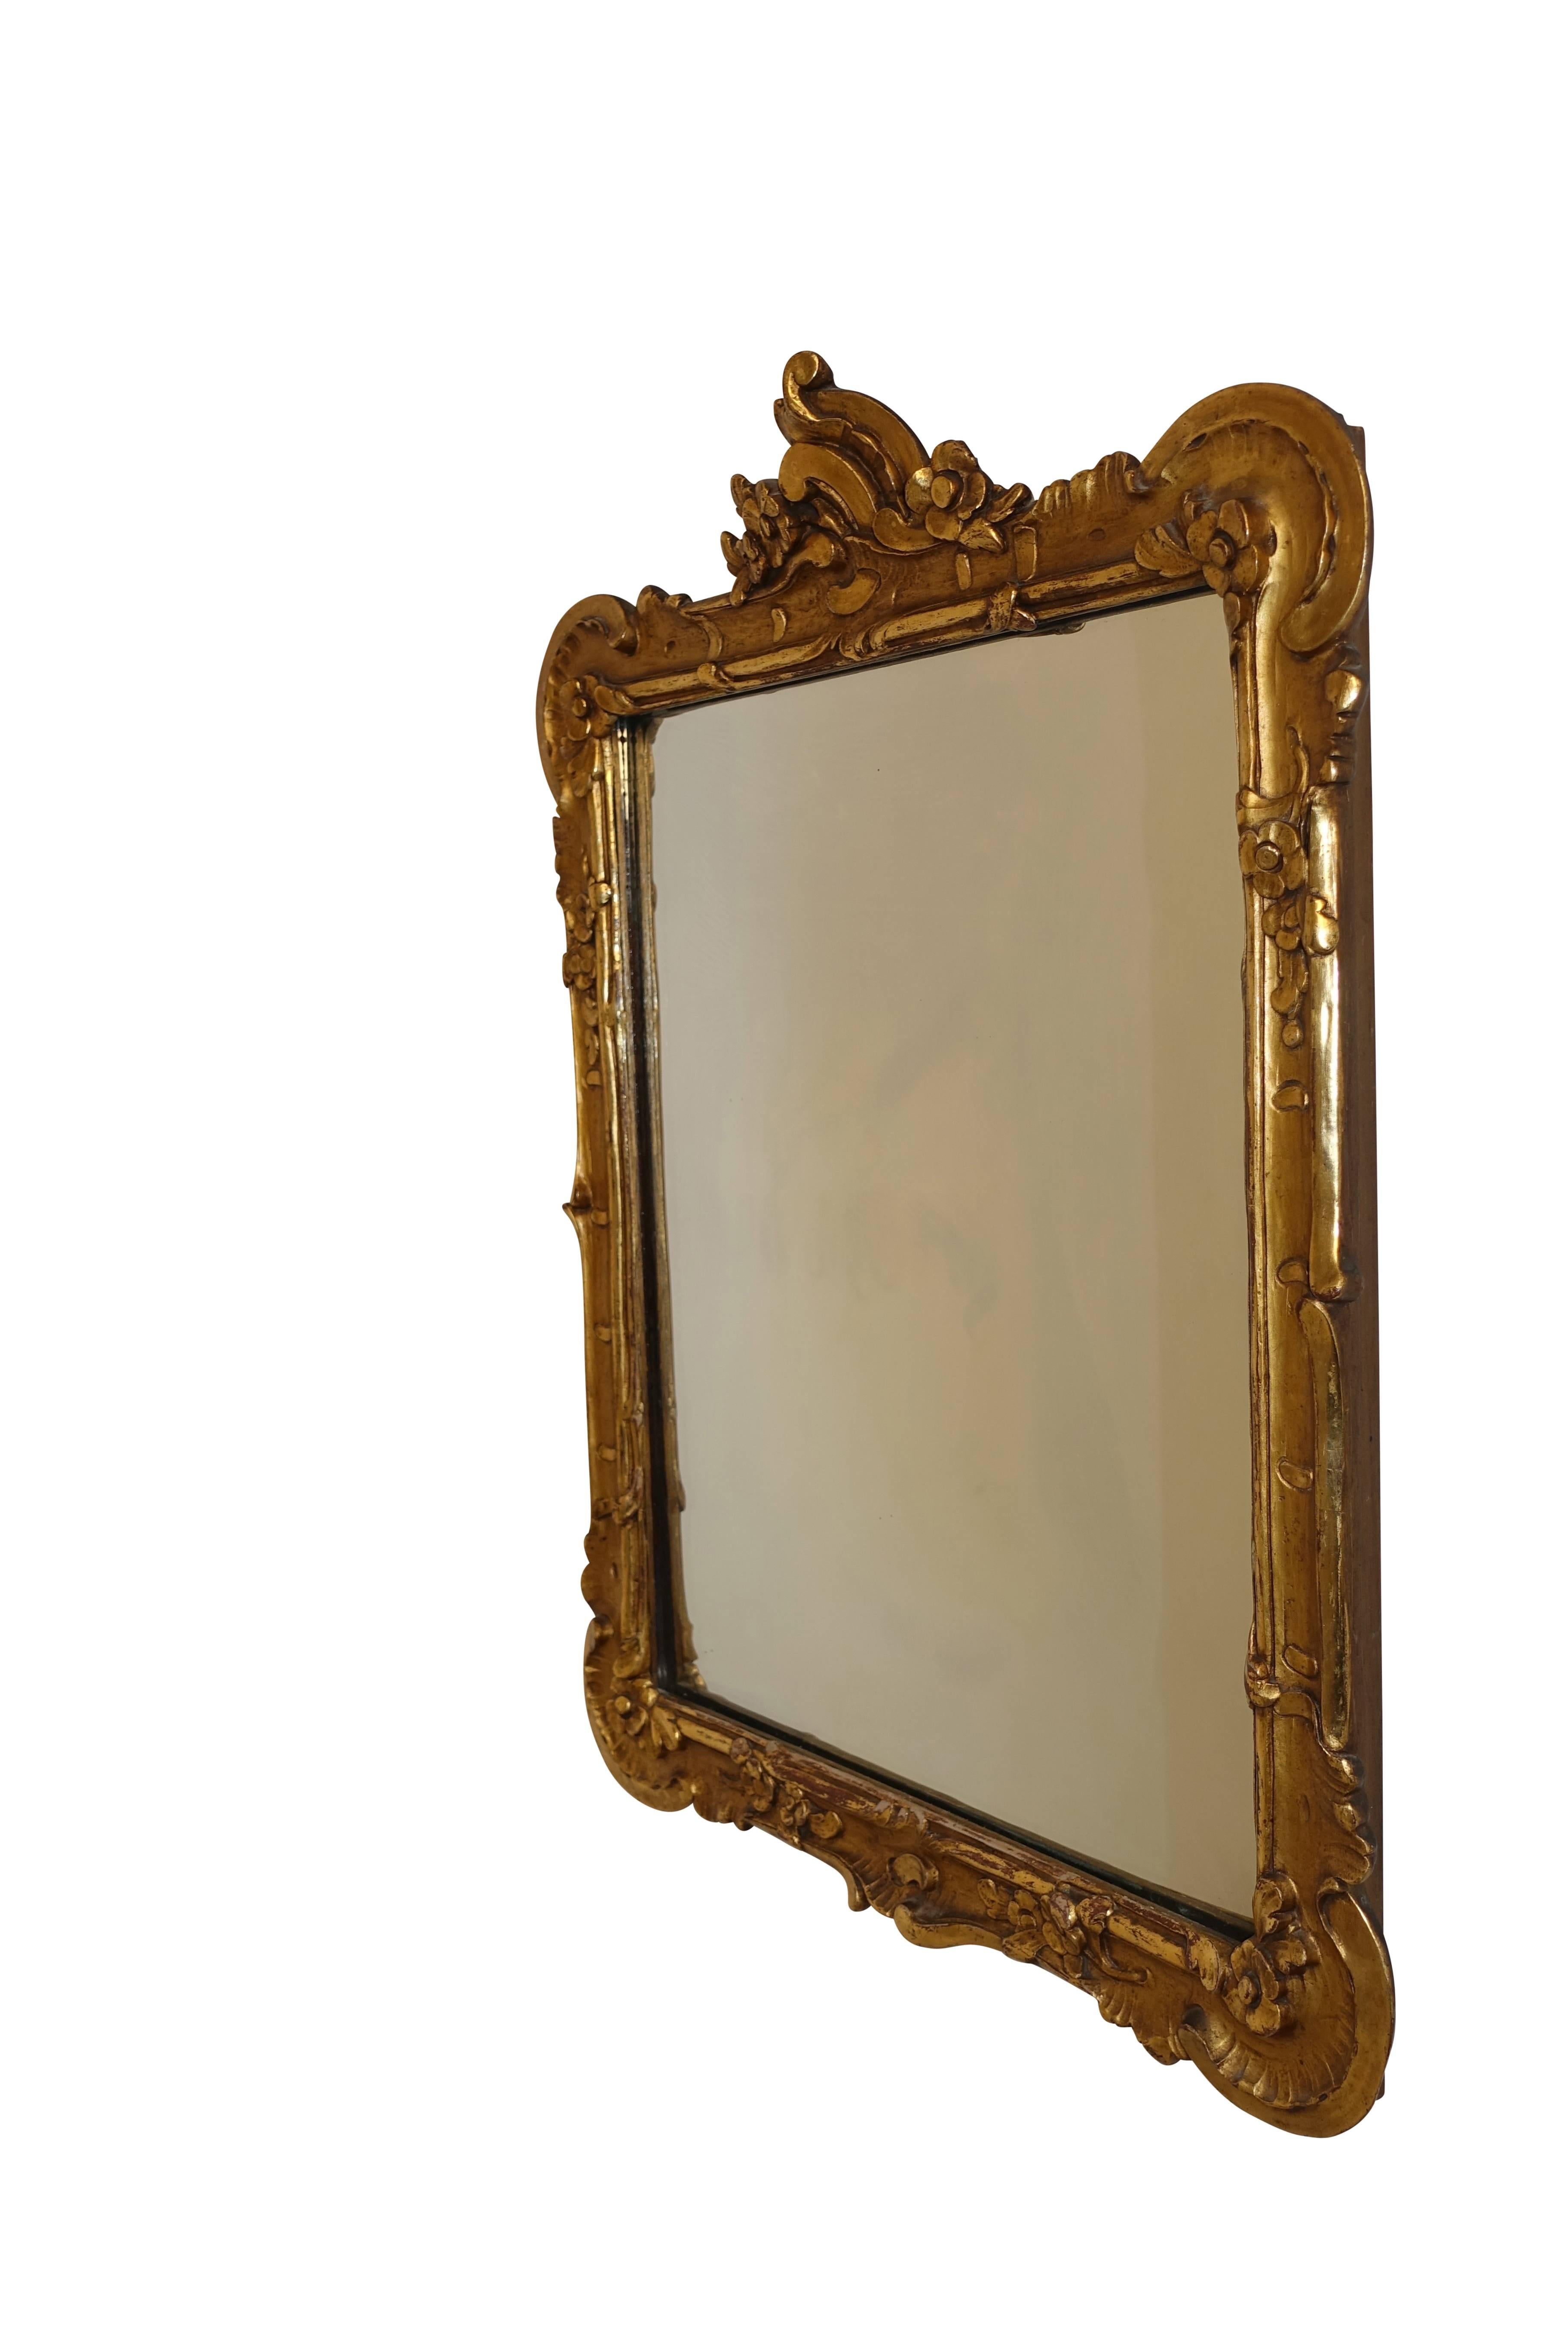 Beautifully carved gilt mirror with C scrolls and flowers surrounding the mirror plate, French, circa 1860.